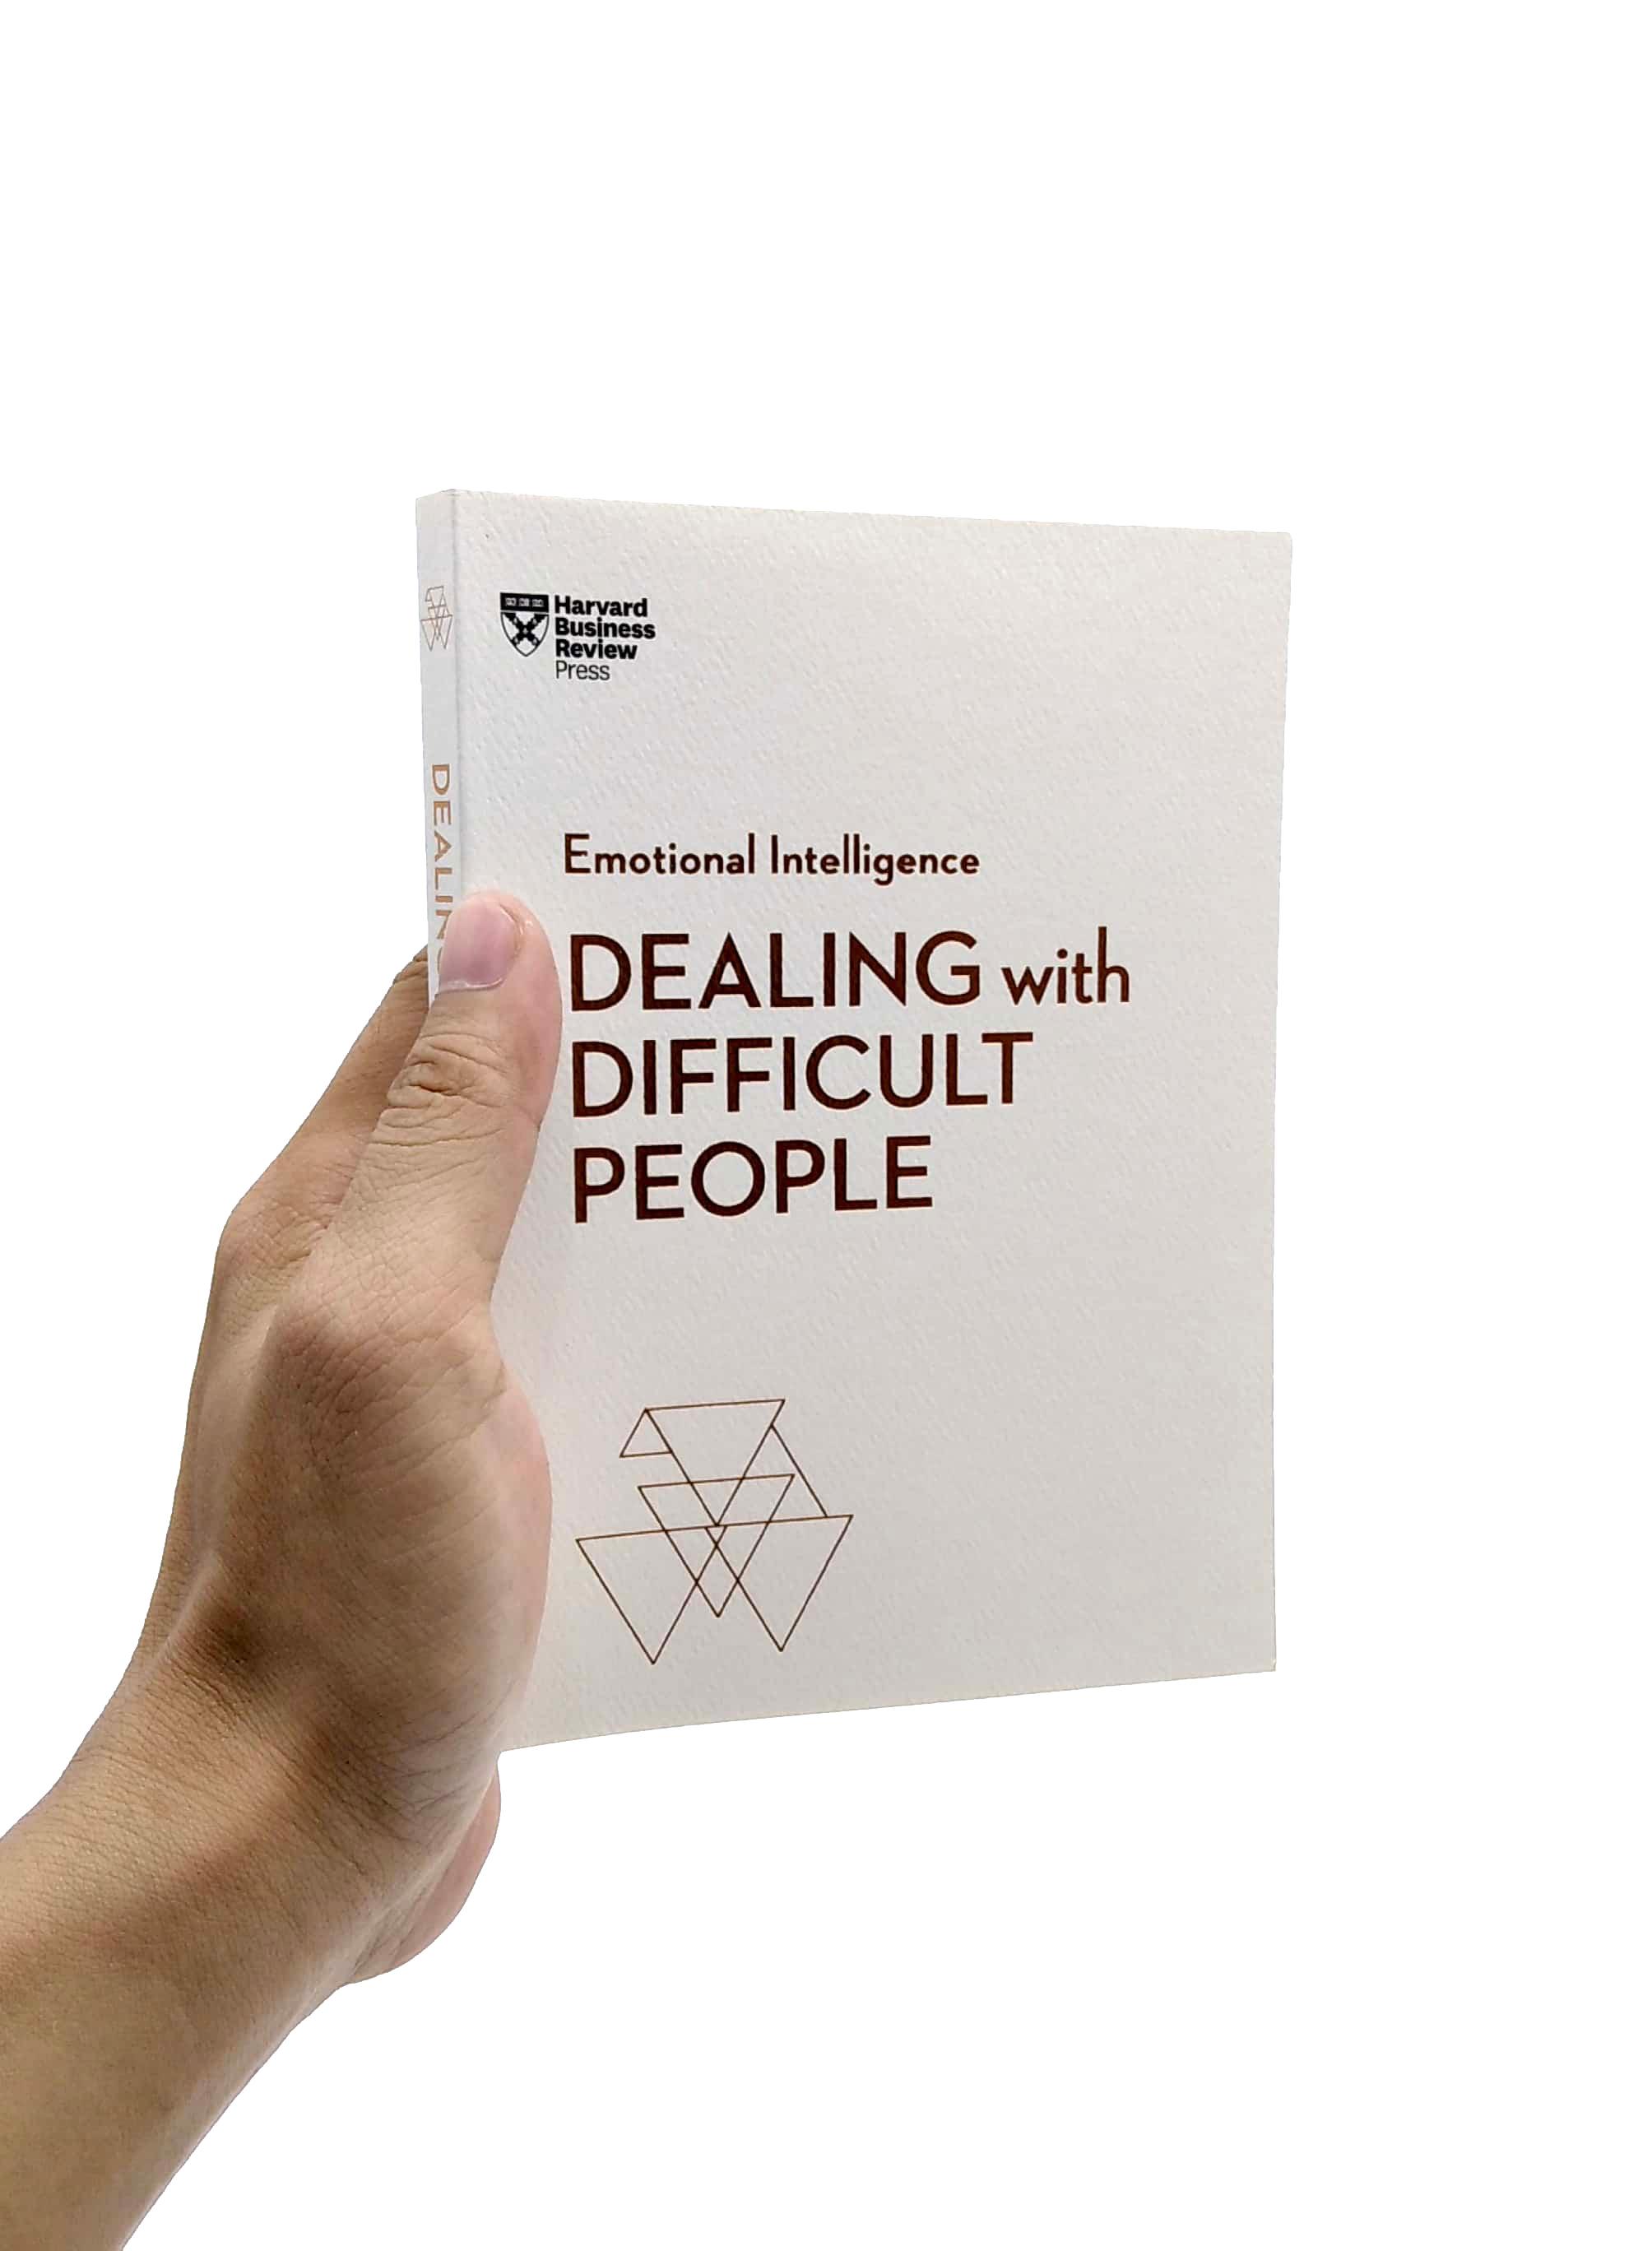 Dealing With Difficult People (HBR Emotional Intelligence Series)